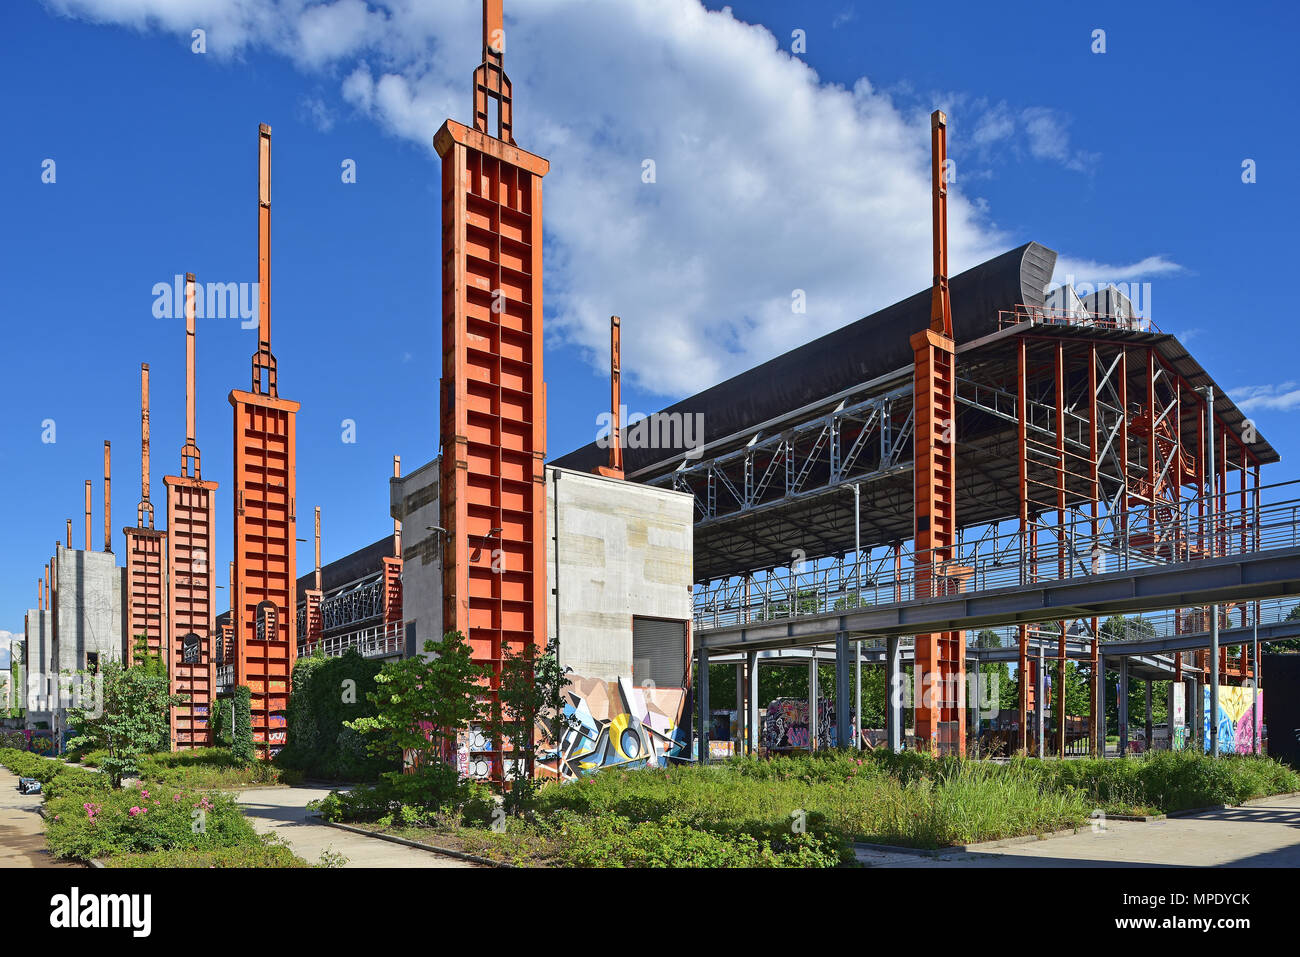 Parco Dora, intra-urban industrial wasteland emerged as post-industrial city park, general view, Turin, Italy Stock Photo